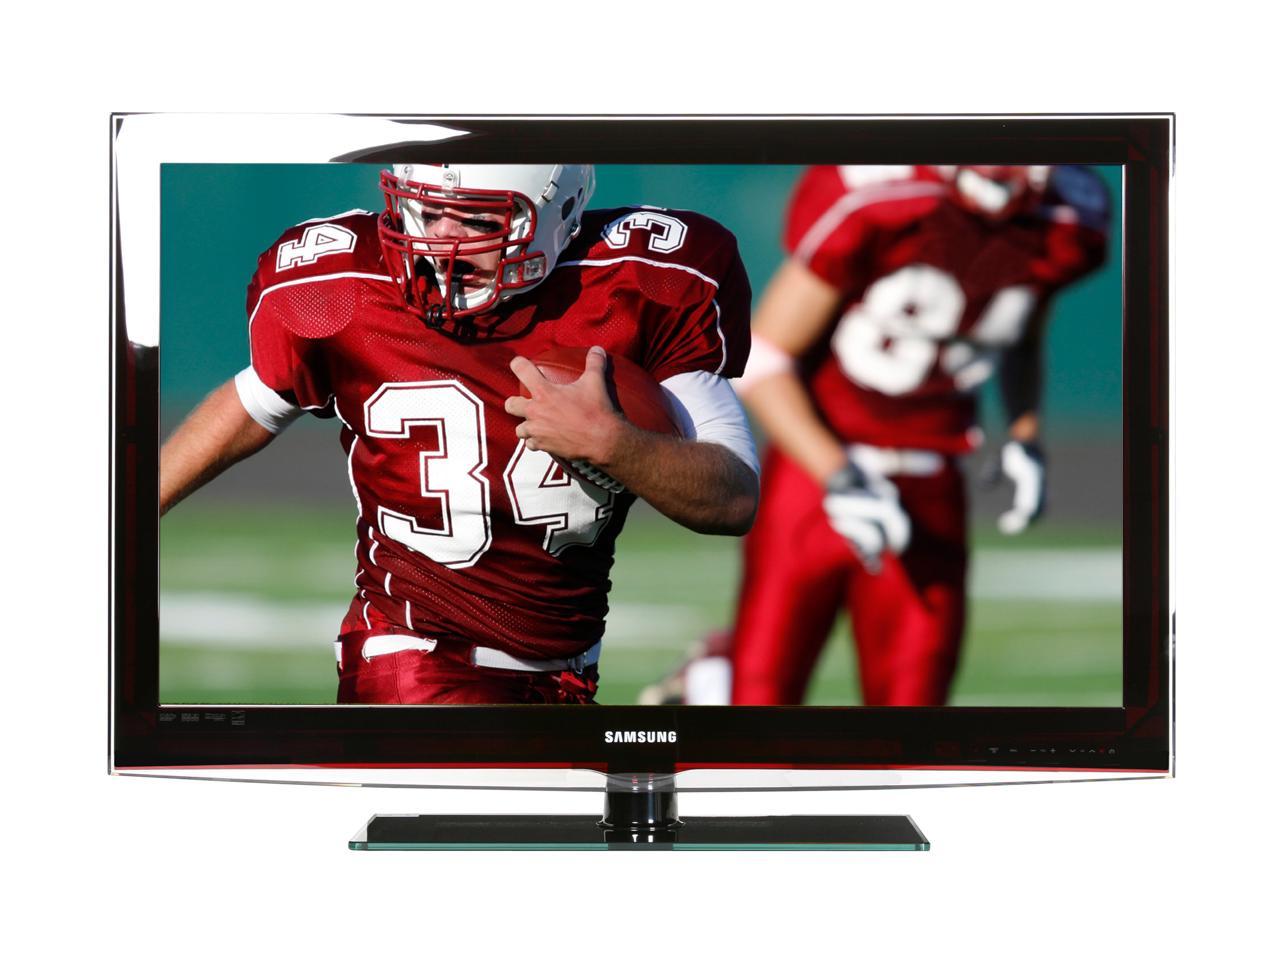 Samsung 40" 1080p LCD HDTV w/ Touch of Color Design - - Newegg.com